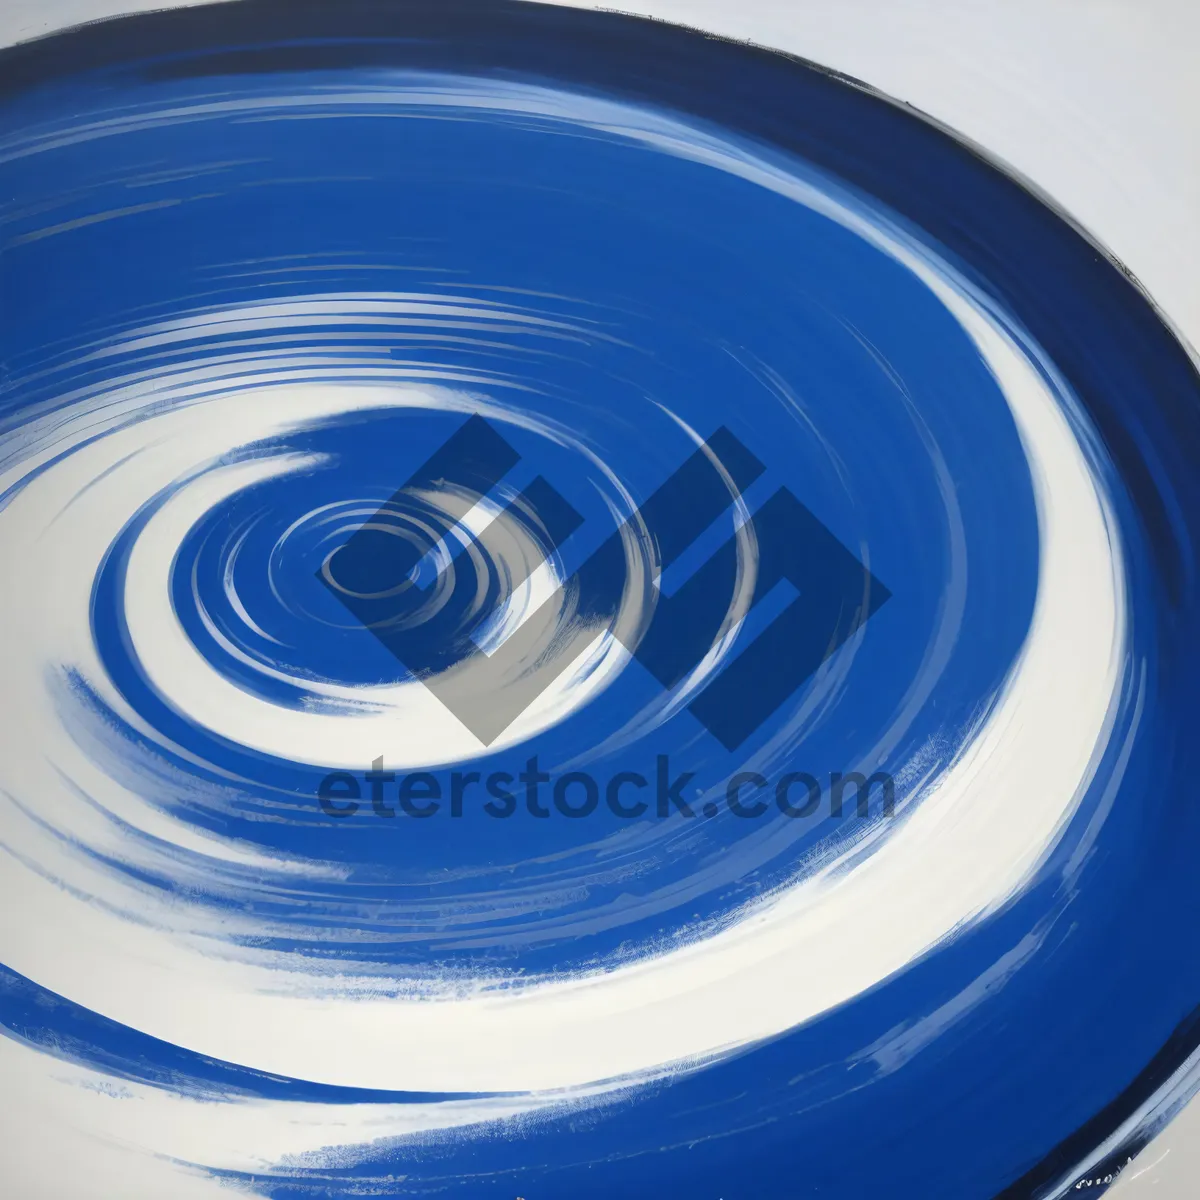 Picture of Rippling Liquid Bowl: Cool and Clean Circle Design